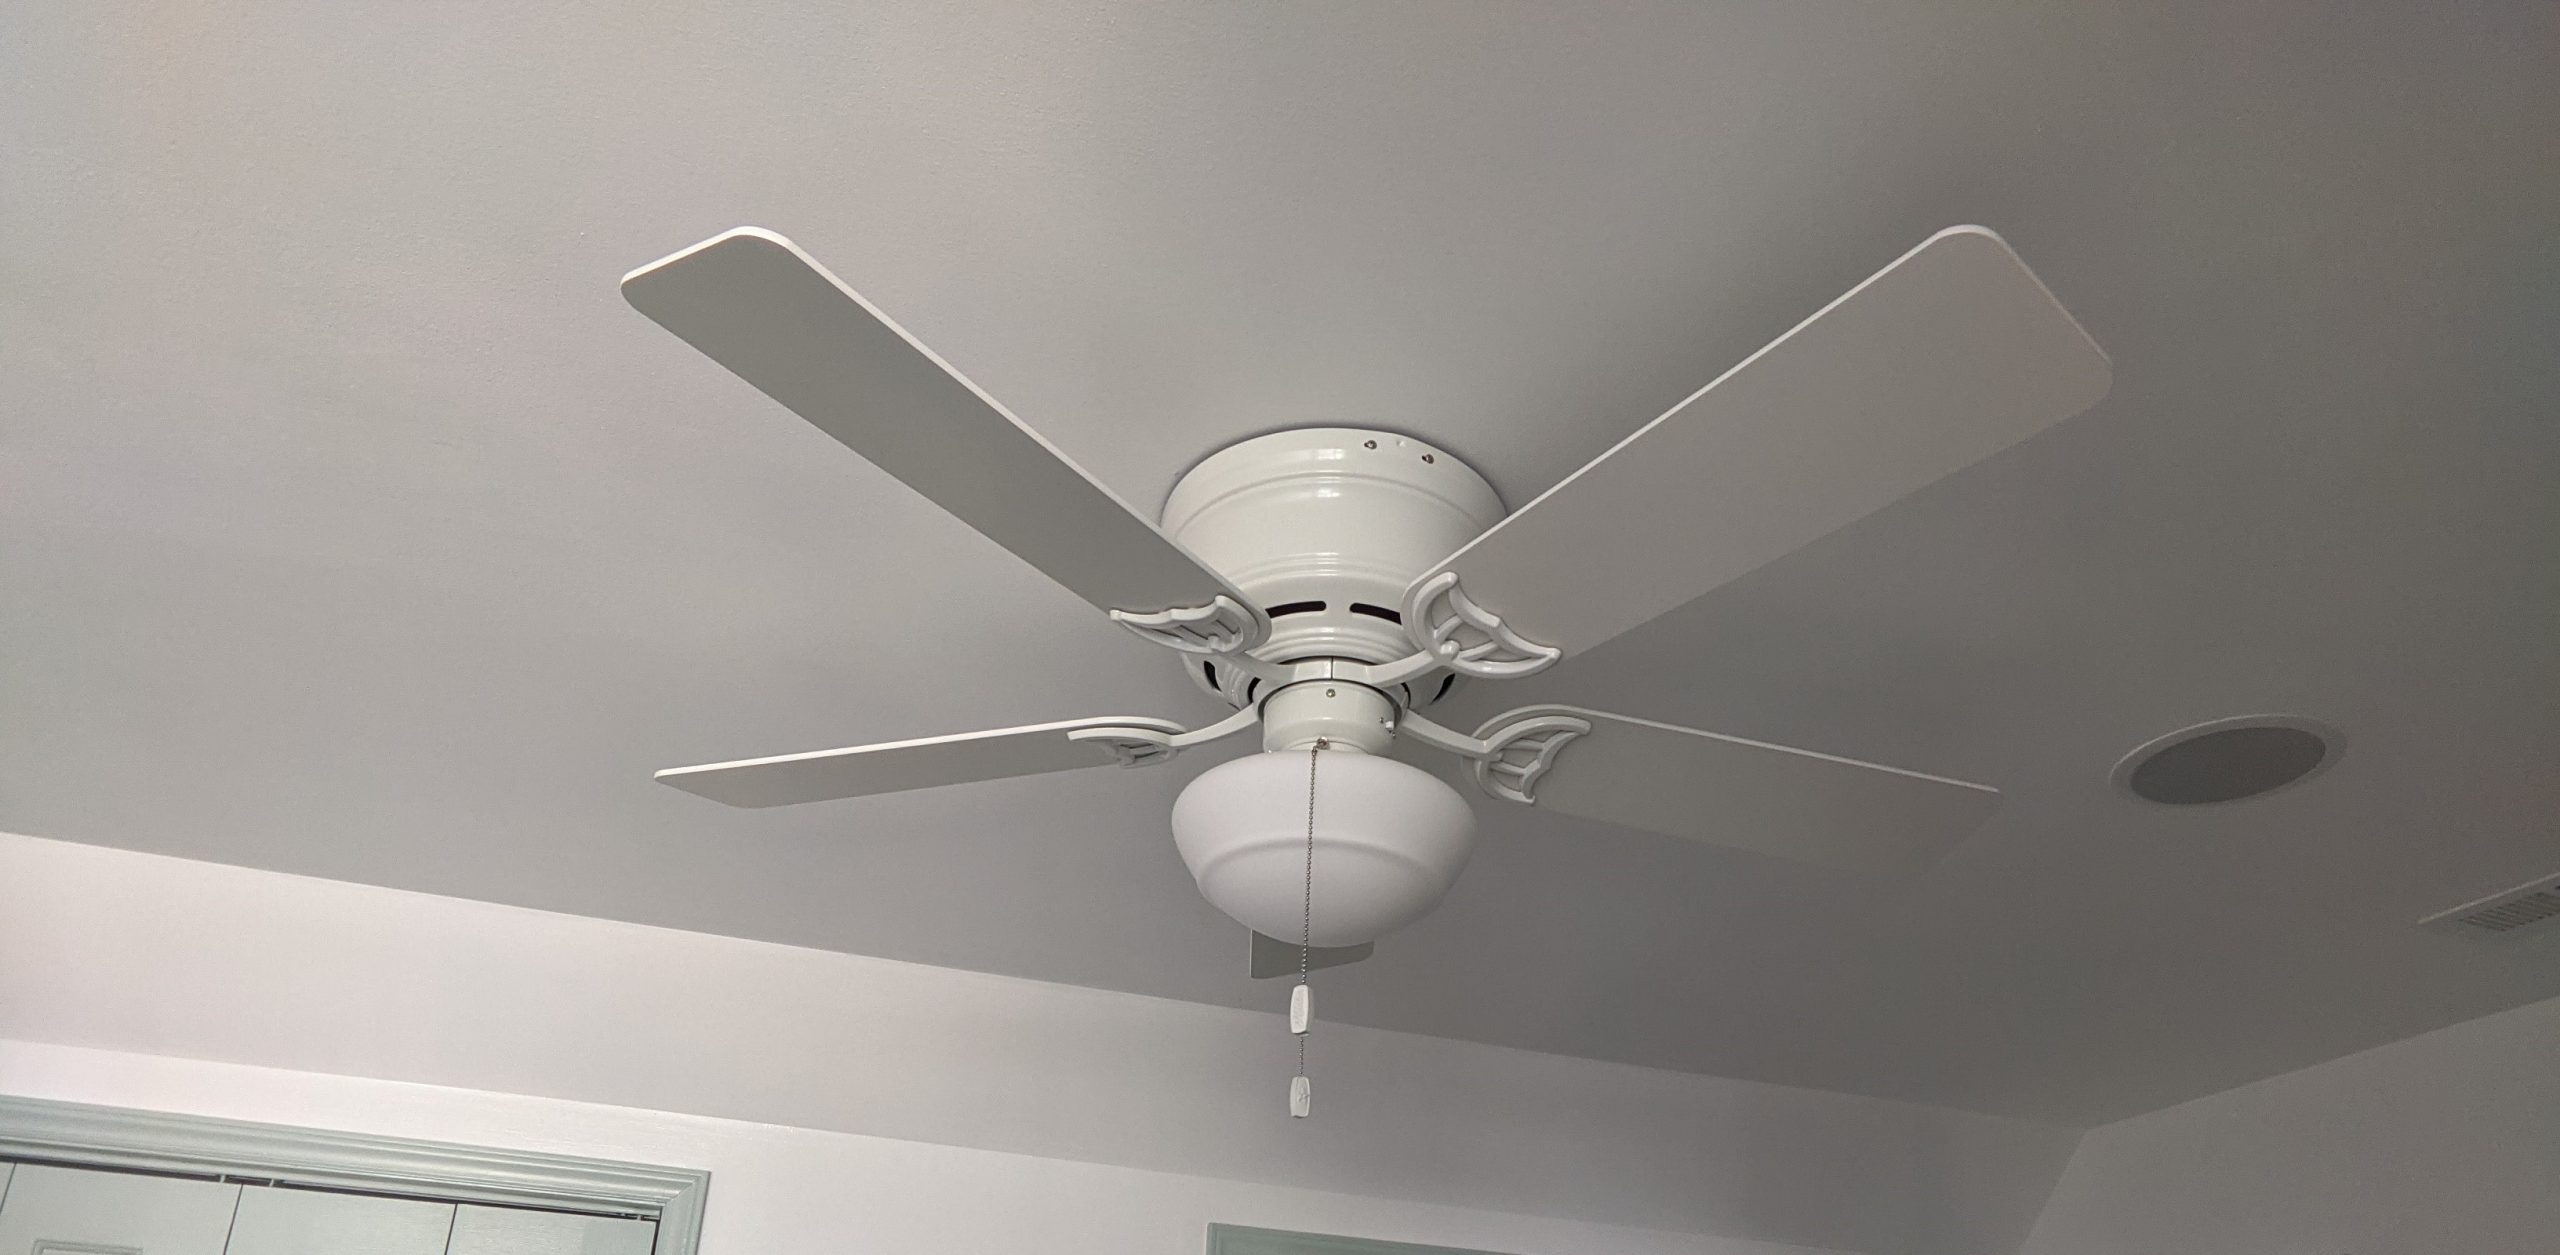 Installing a Ceiling Fan - Paint Covered Overalls - Durham North Carolina